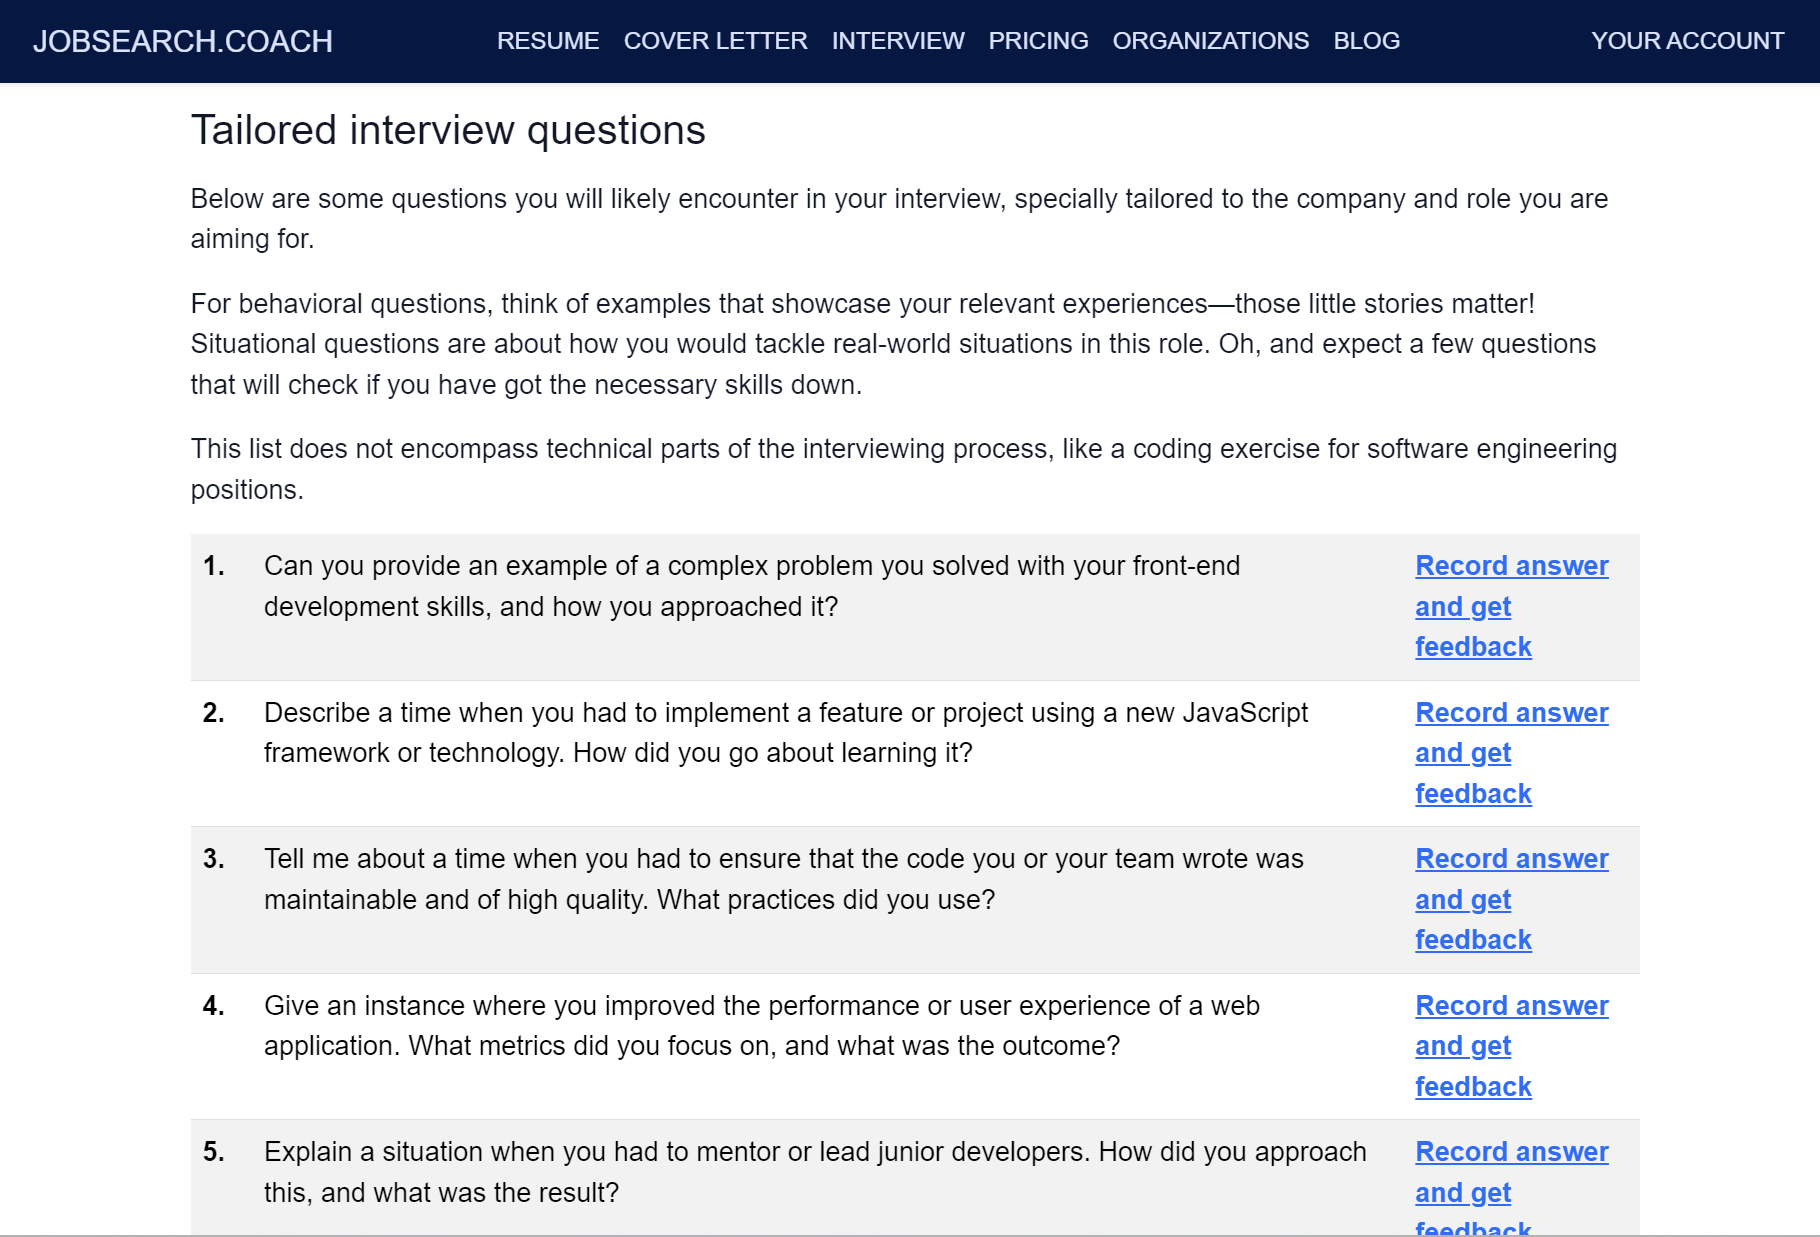 Screenshot of likely job interview questions identified during AI interview preparation at JobSearch.Coach